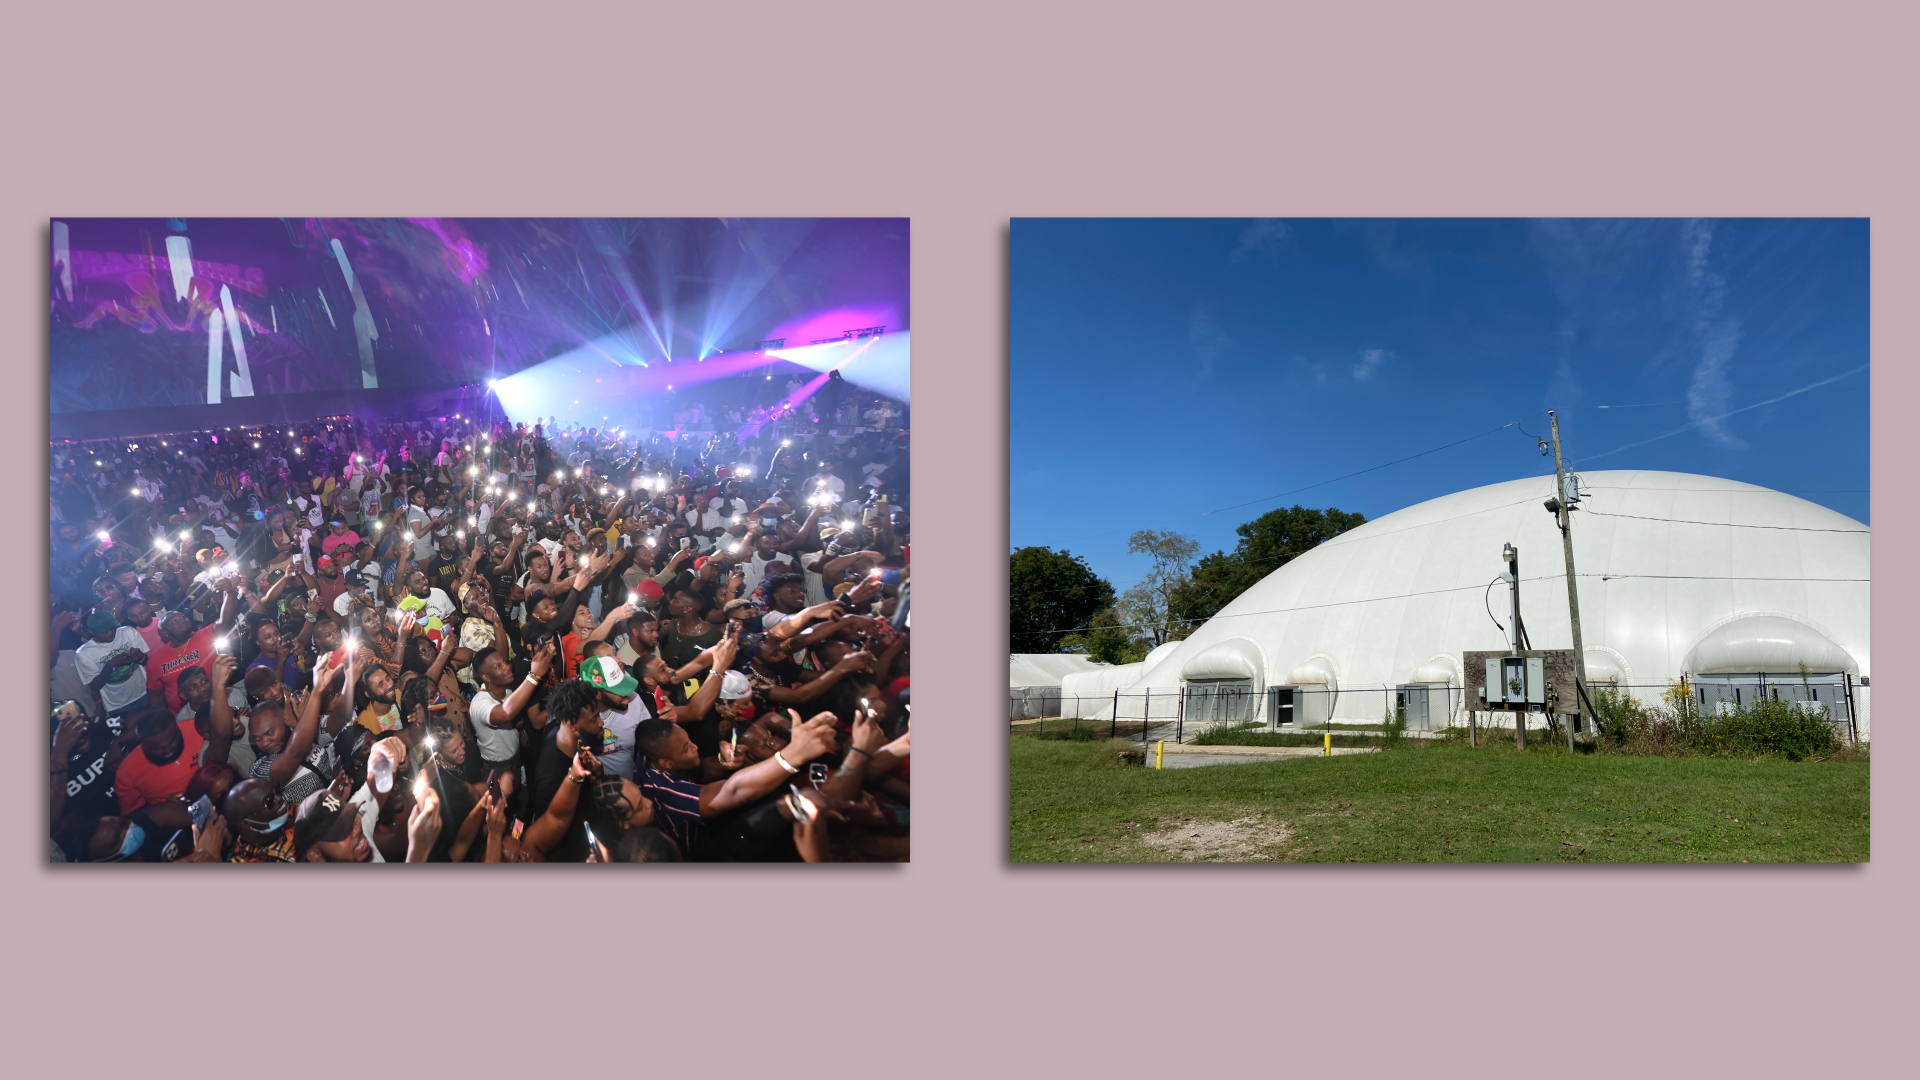 Side by side photos of a crowd holding up phones at a concert and a mound-shaped white tent-like building called Dome in the City